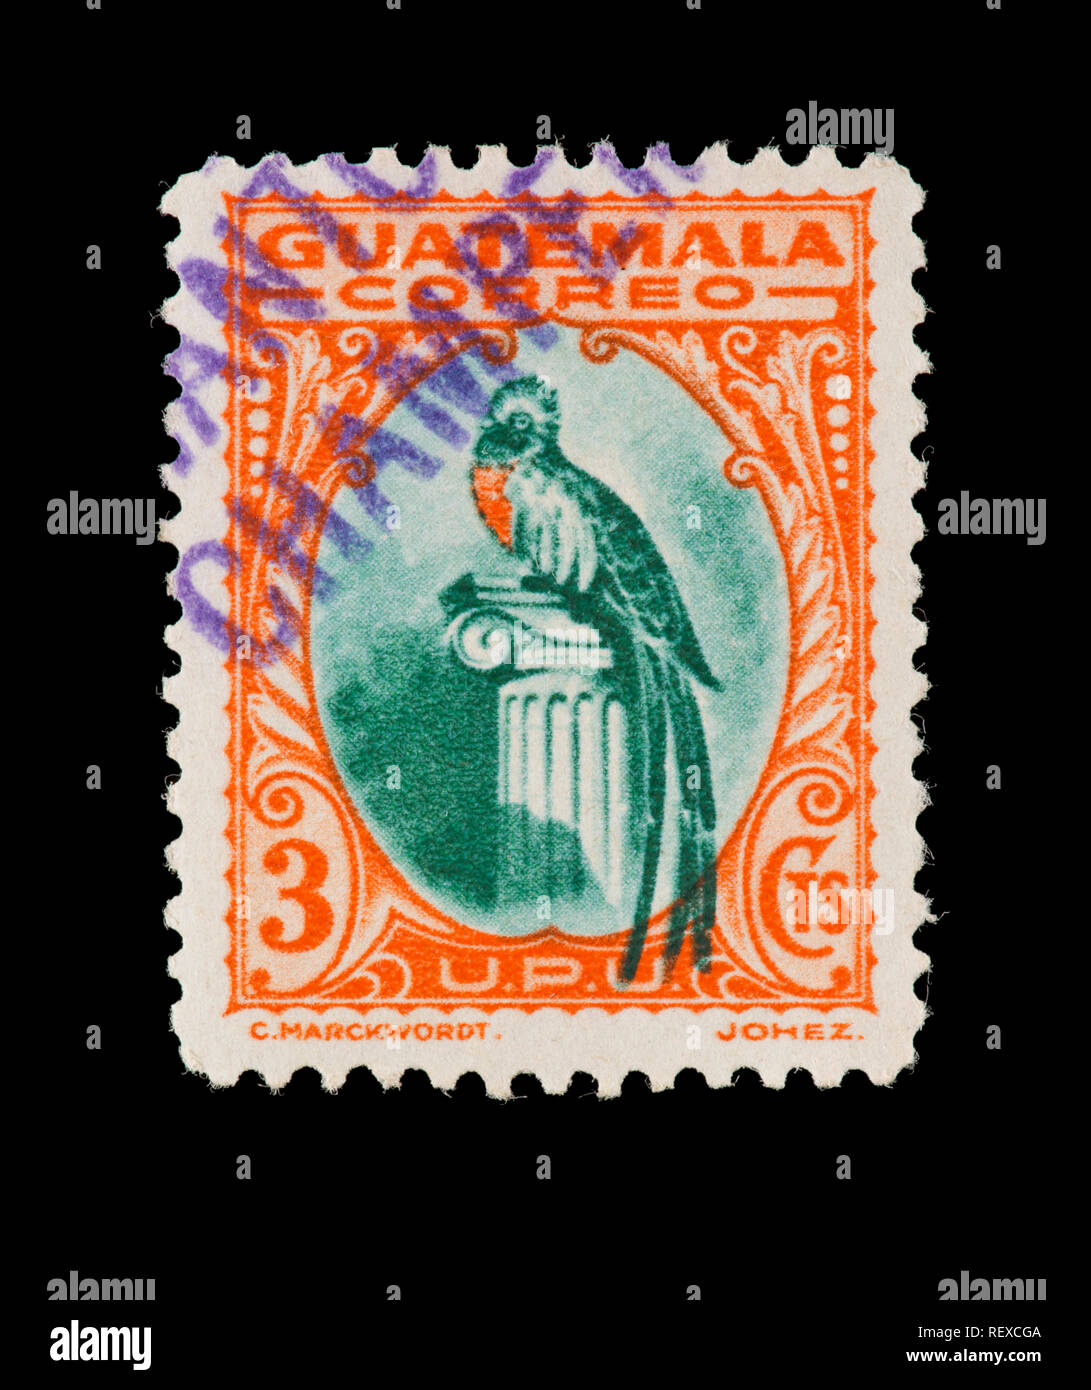 Postage stamp from Guatemala depicting a quetzal, national bird. Stock Photo